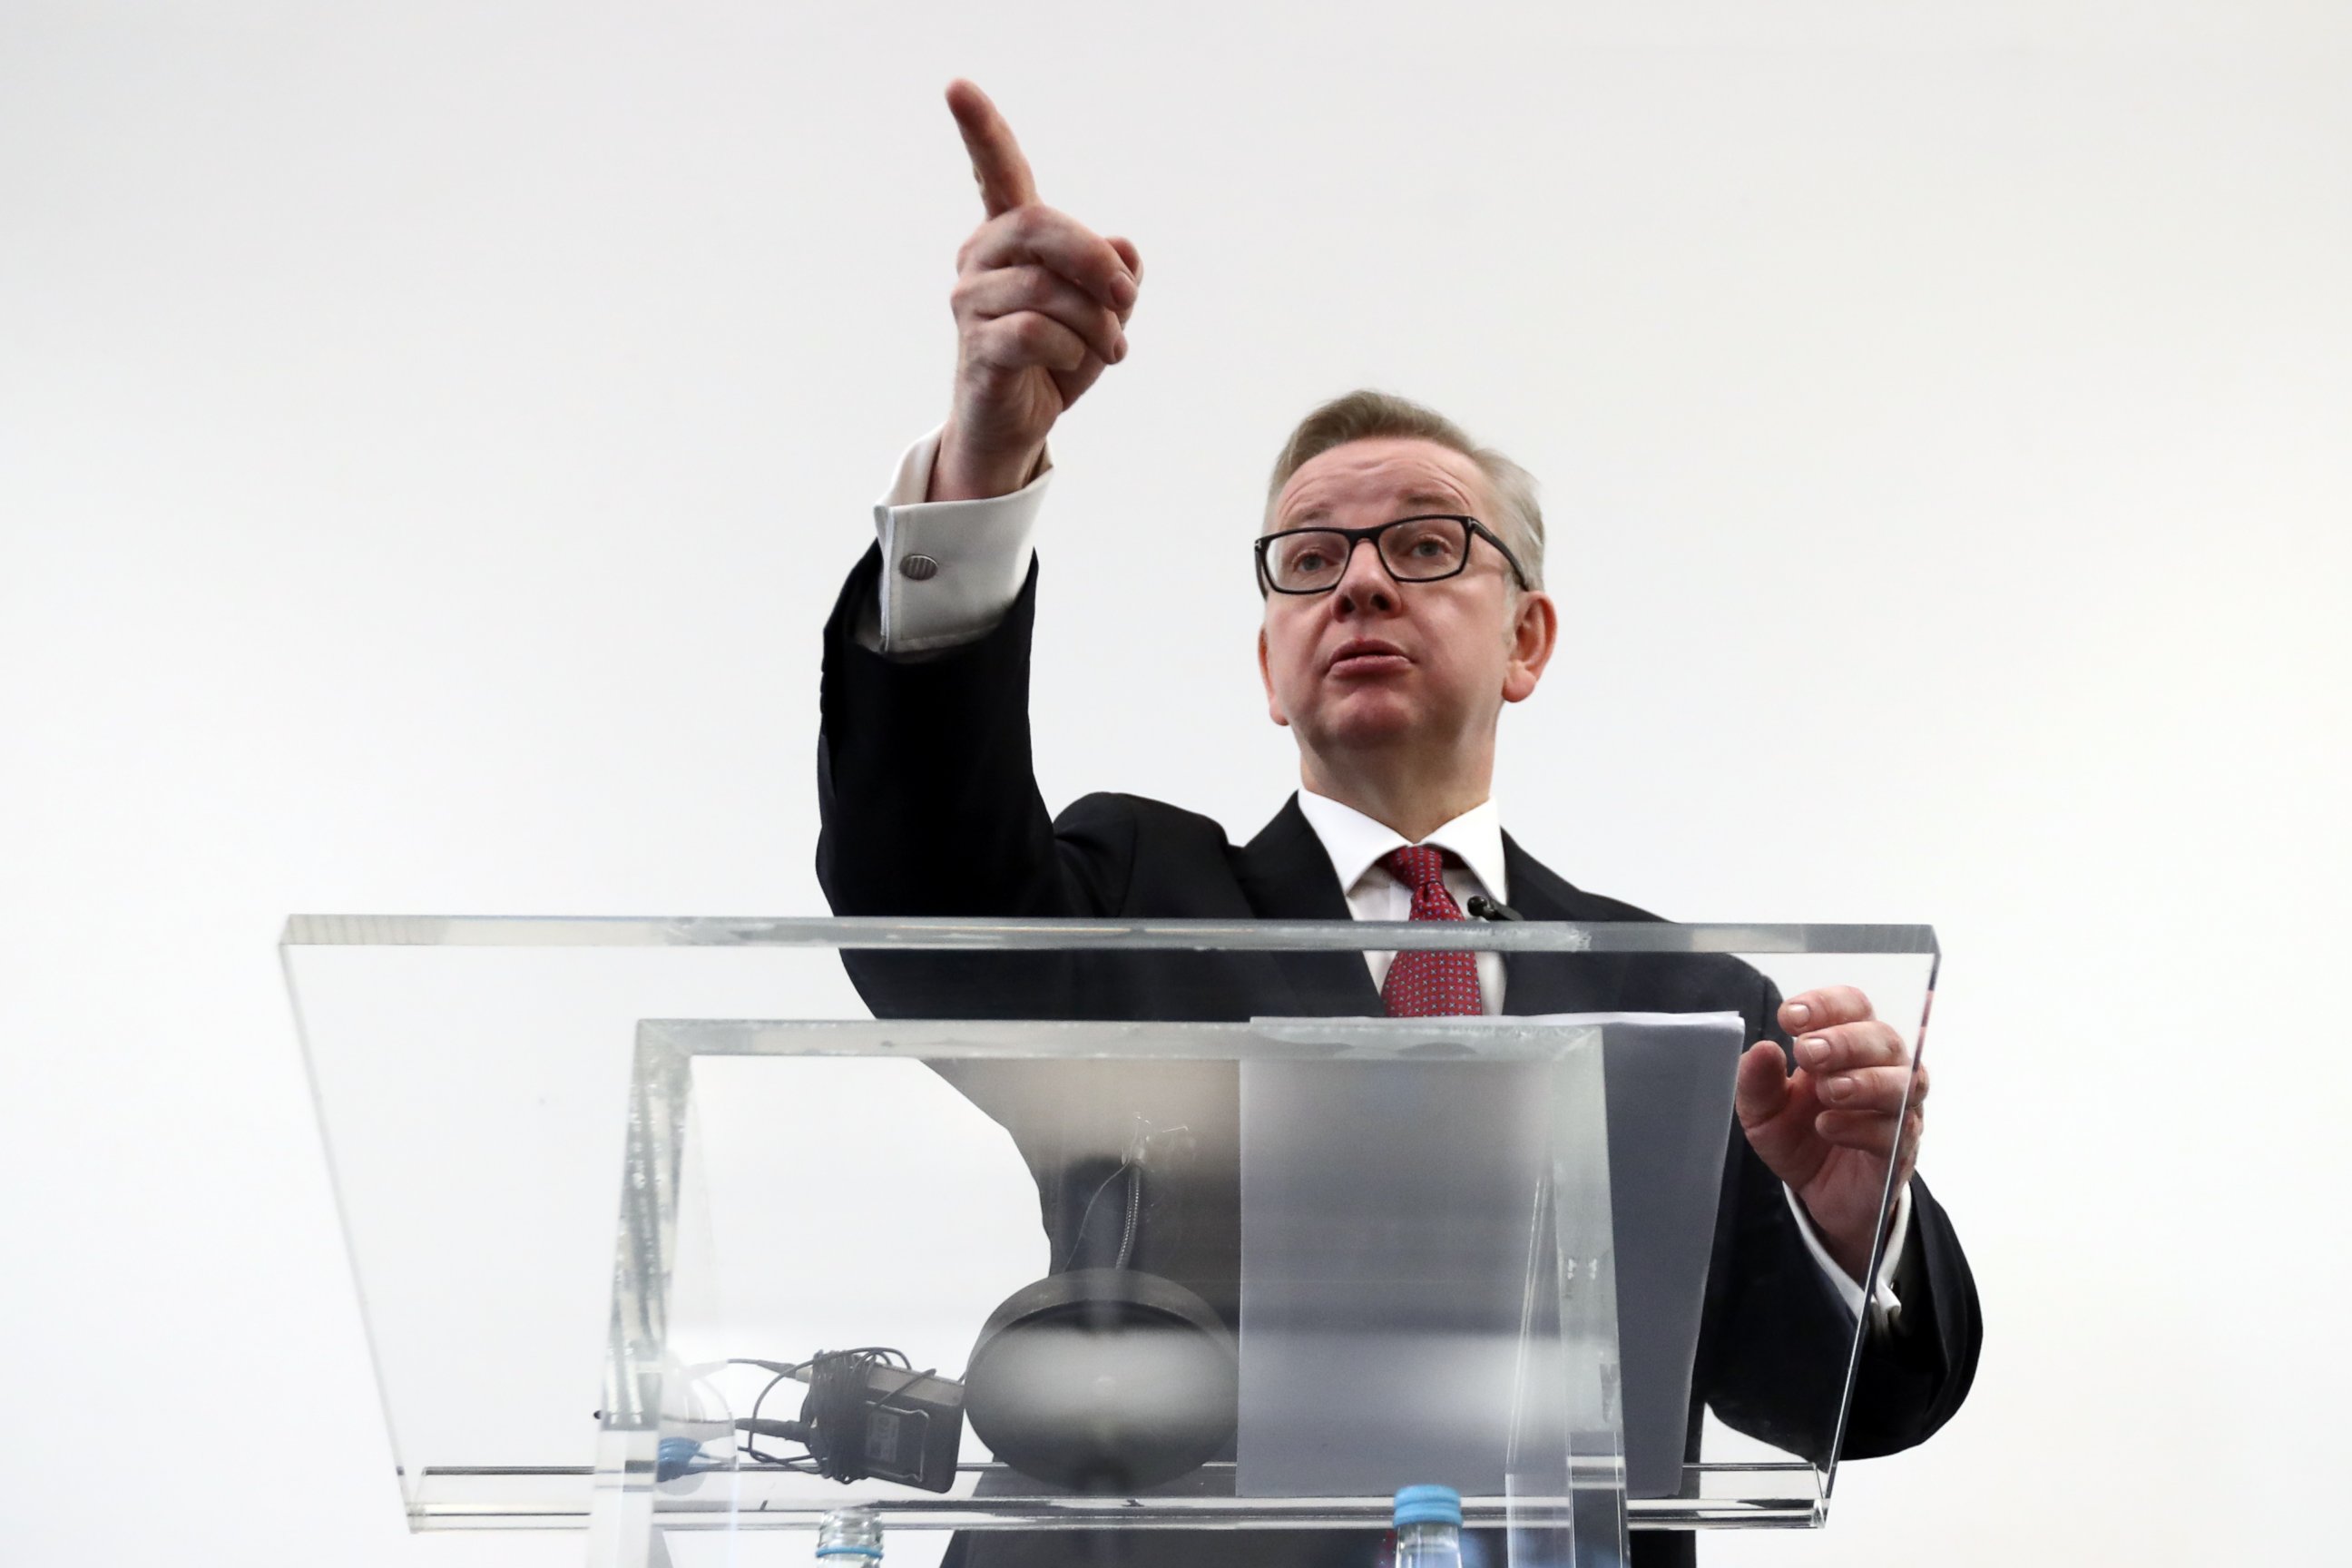 PHOTO: Justice Secretary Michael Gove gestures during a press conference to outline his bid for the Conservative Party leadership, July 1, 2016, in London.